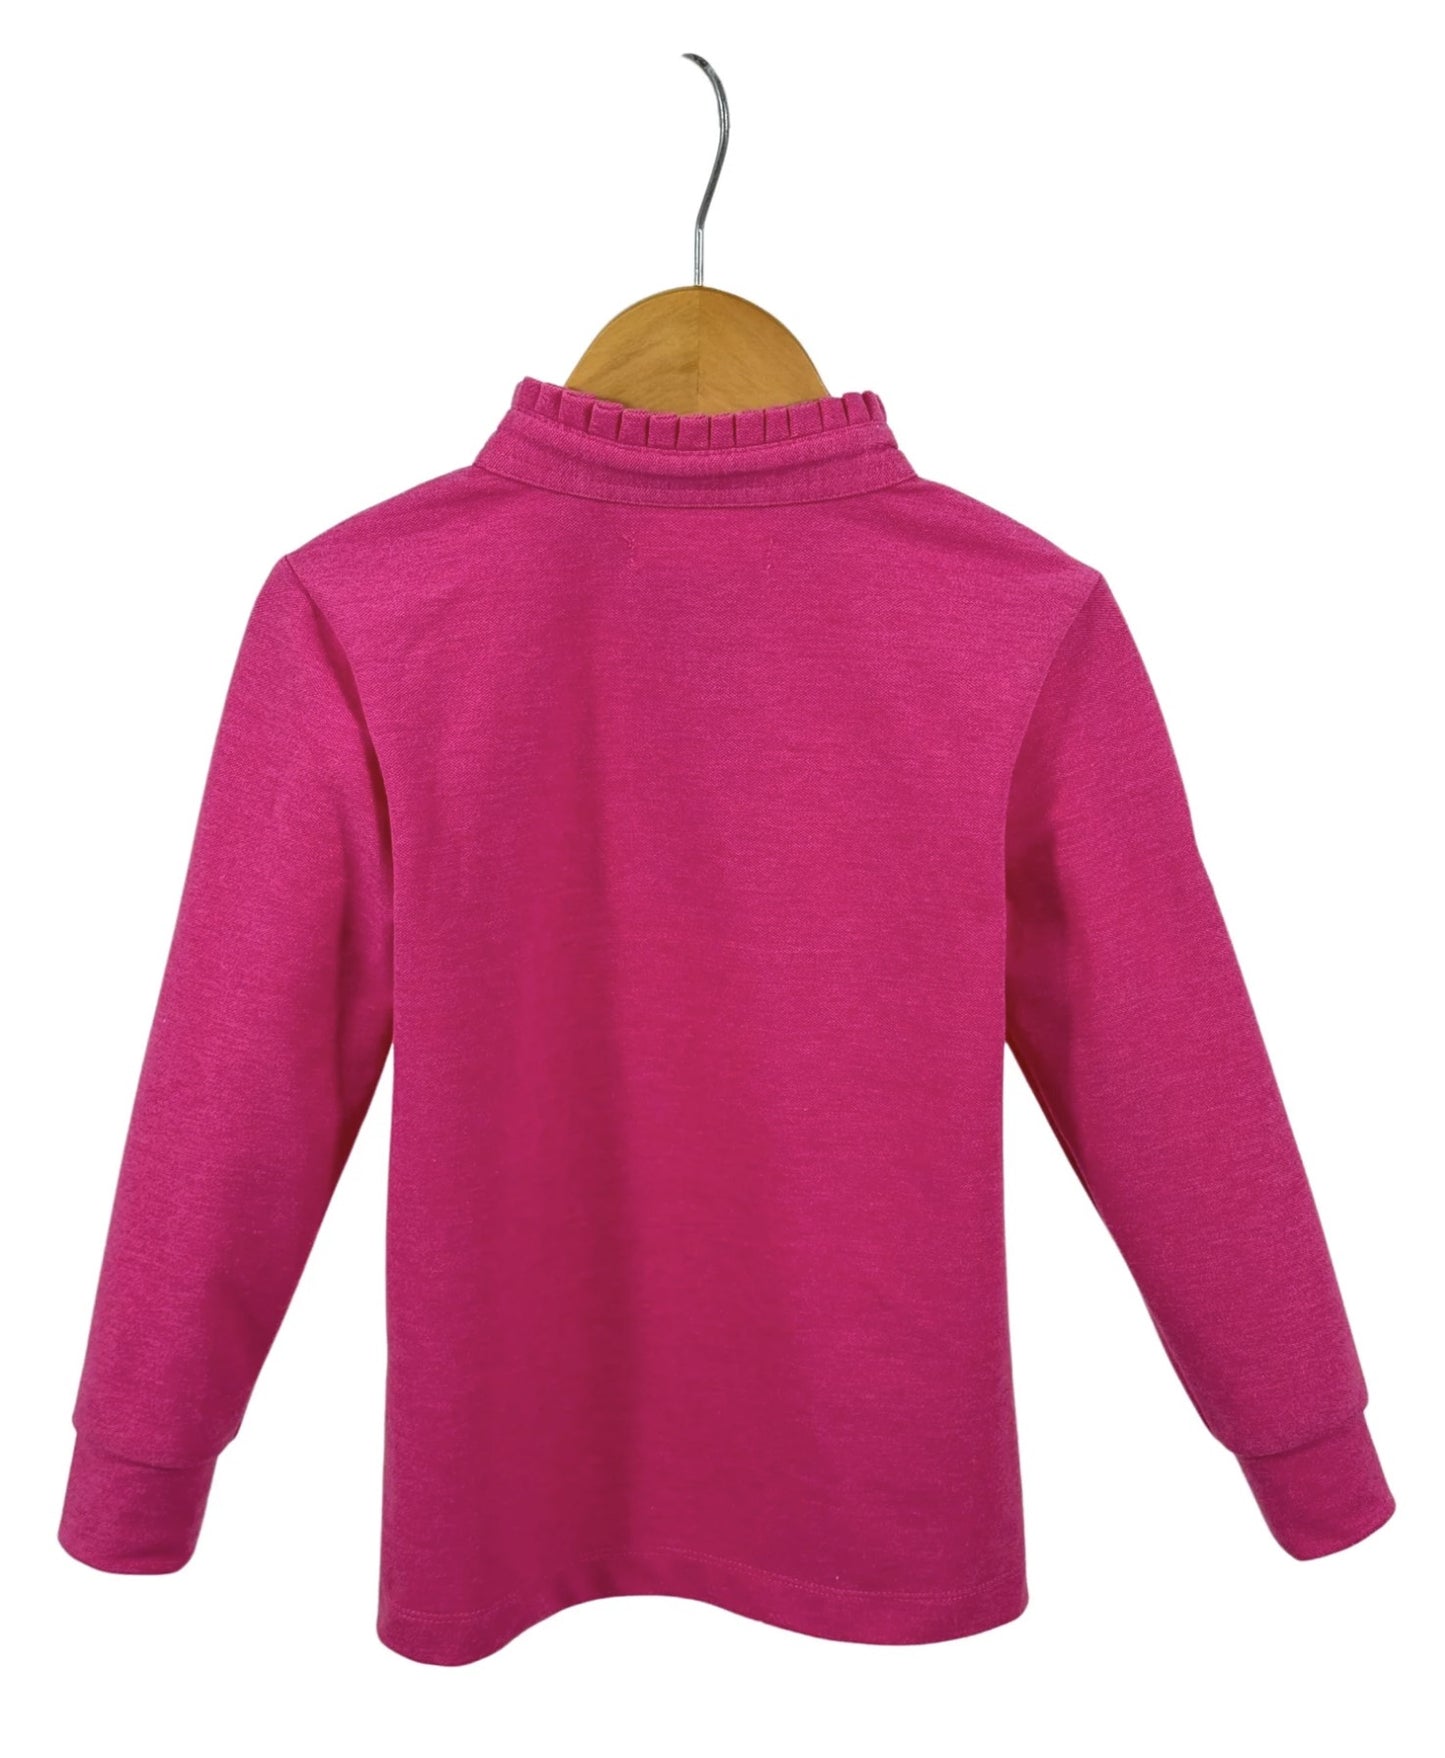 Hallie - Raspberry Pink Contrast Long Sleeve Polo - Baby & Toddler